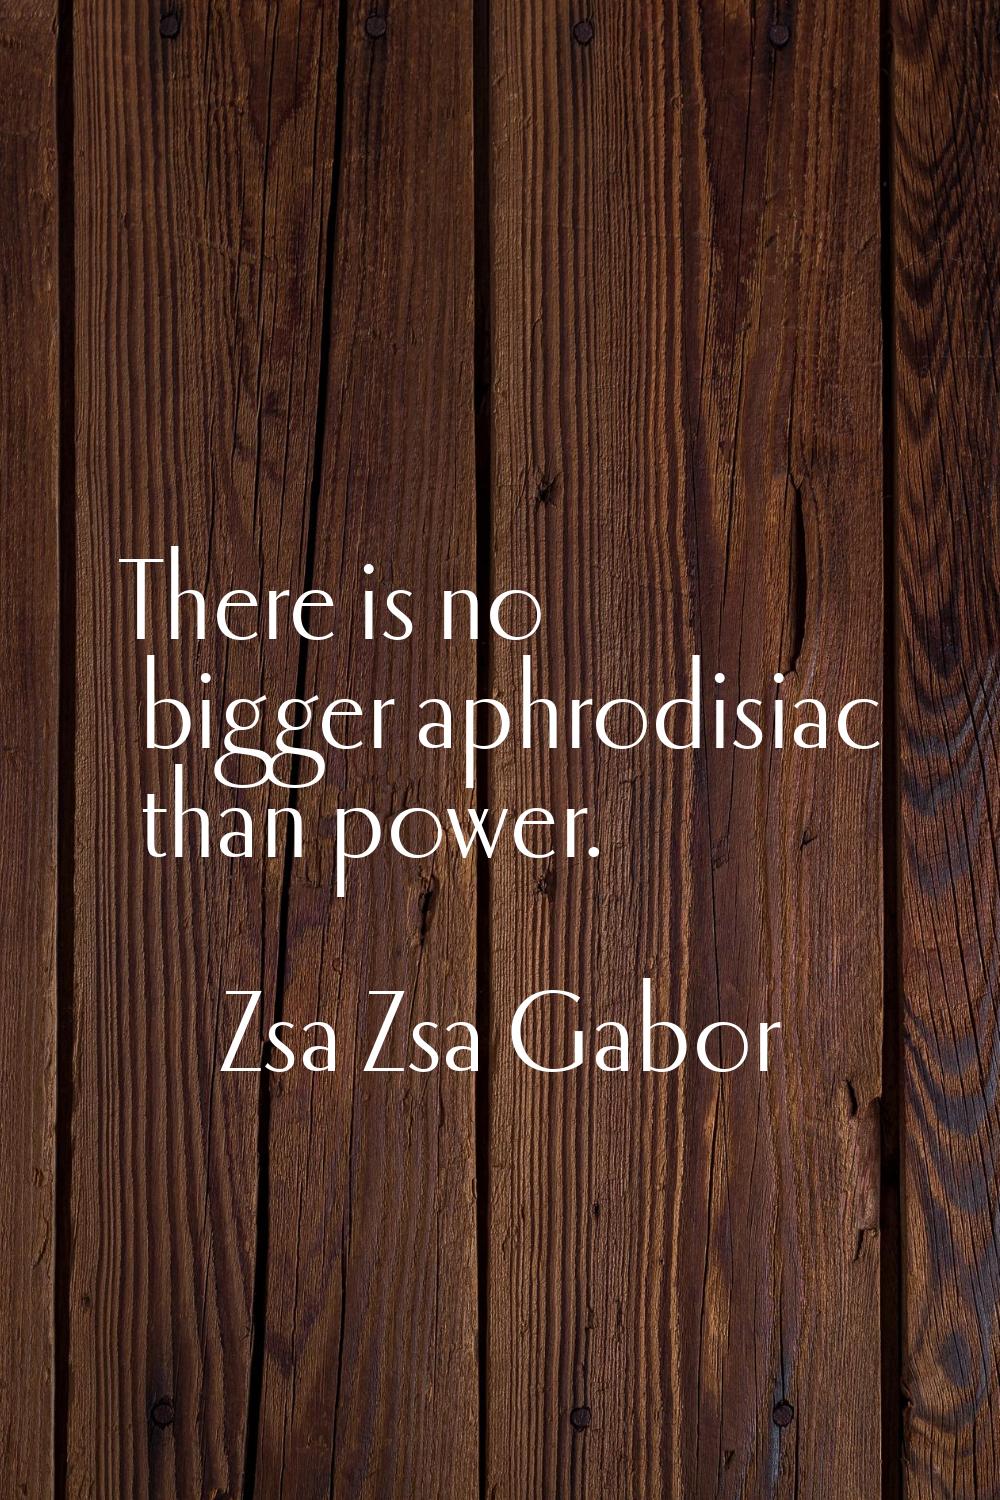 There is no bigger aphrodisiac than power.